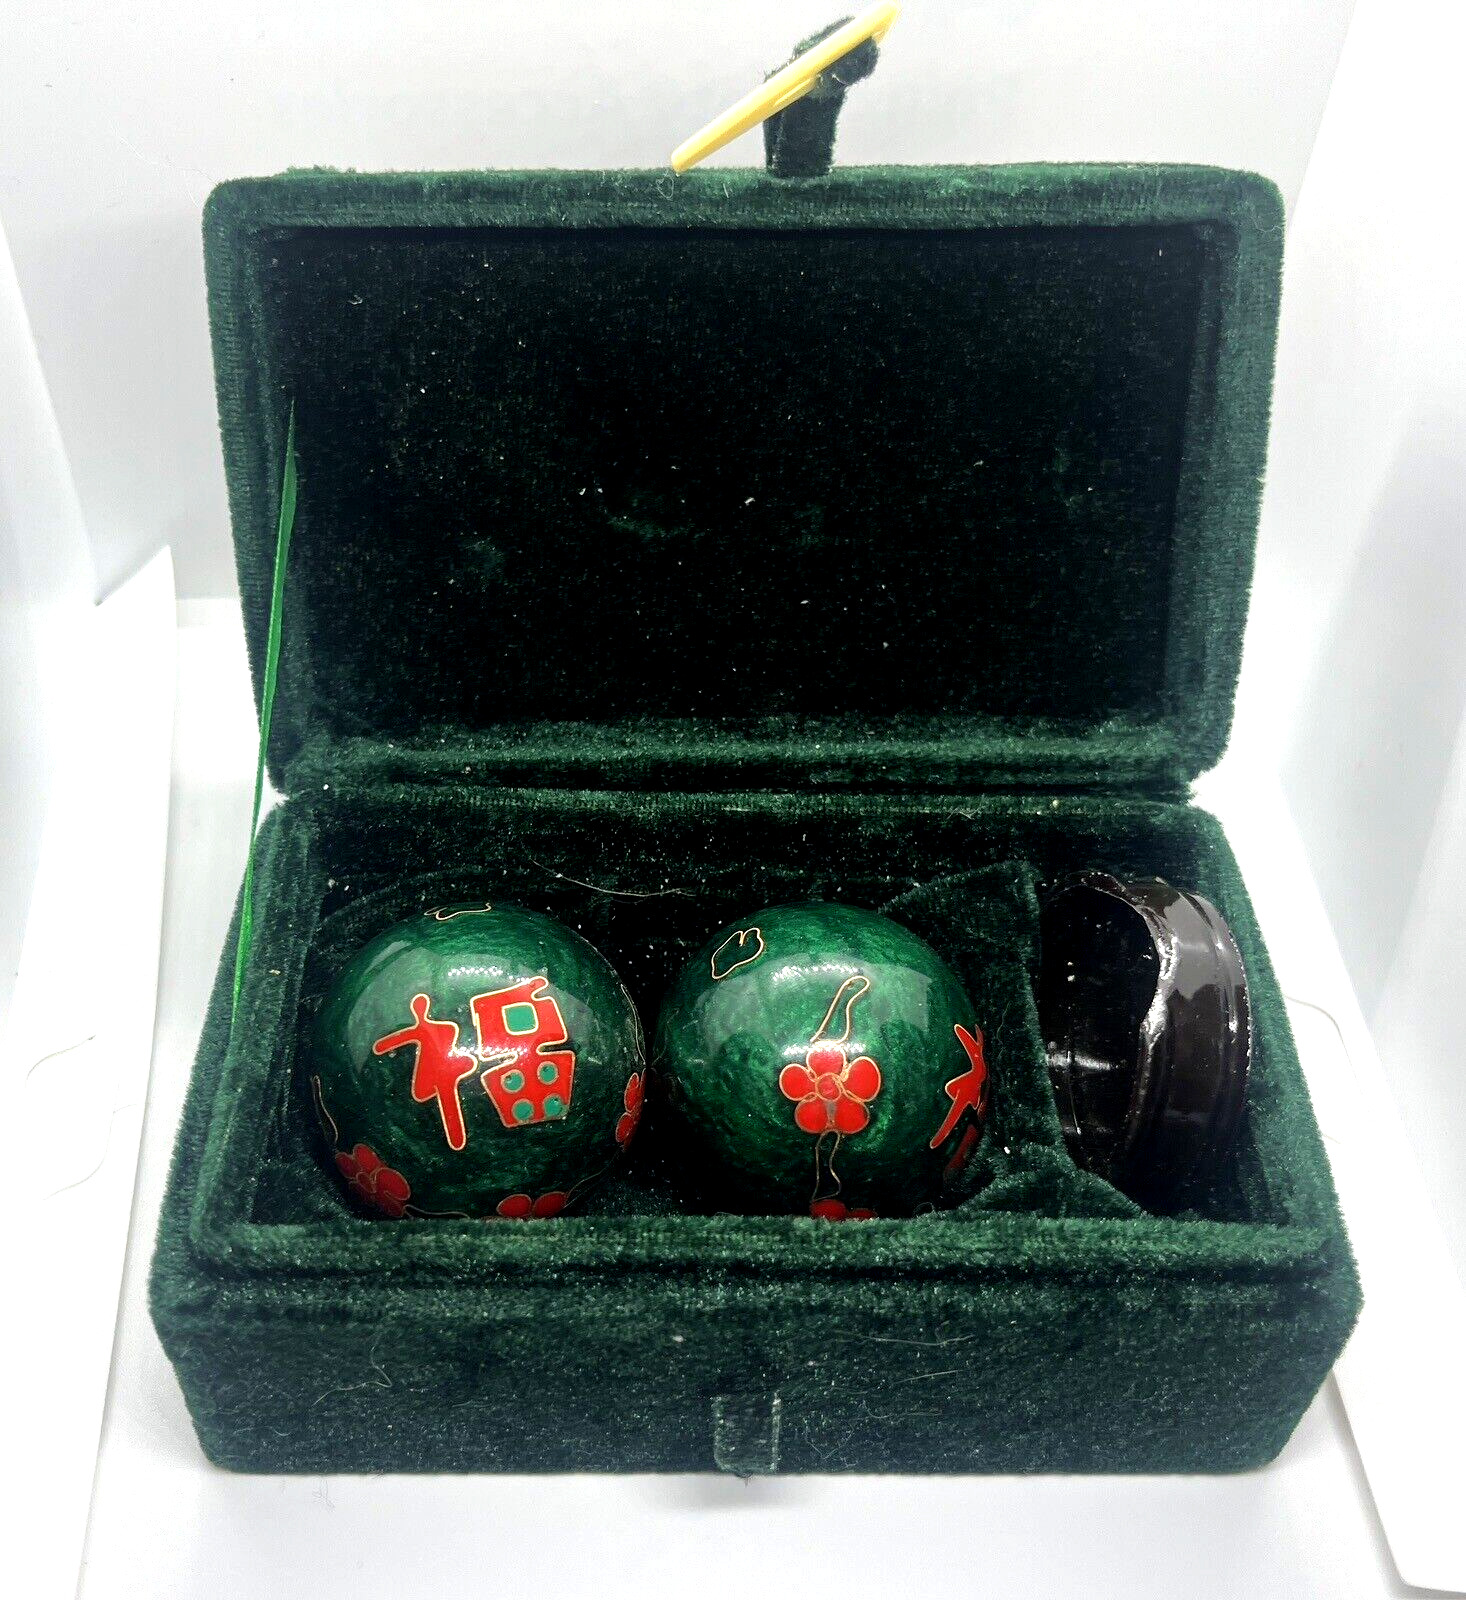 Vintage Chinese Health Baoding Balls Stress Relief Exercise Relaxation Therapy